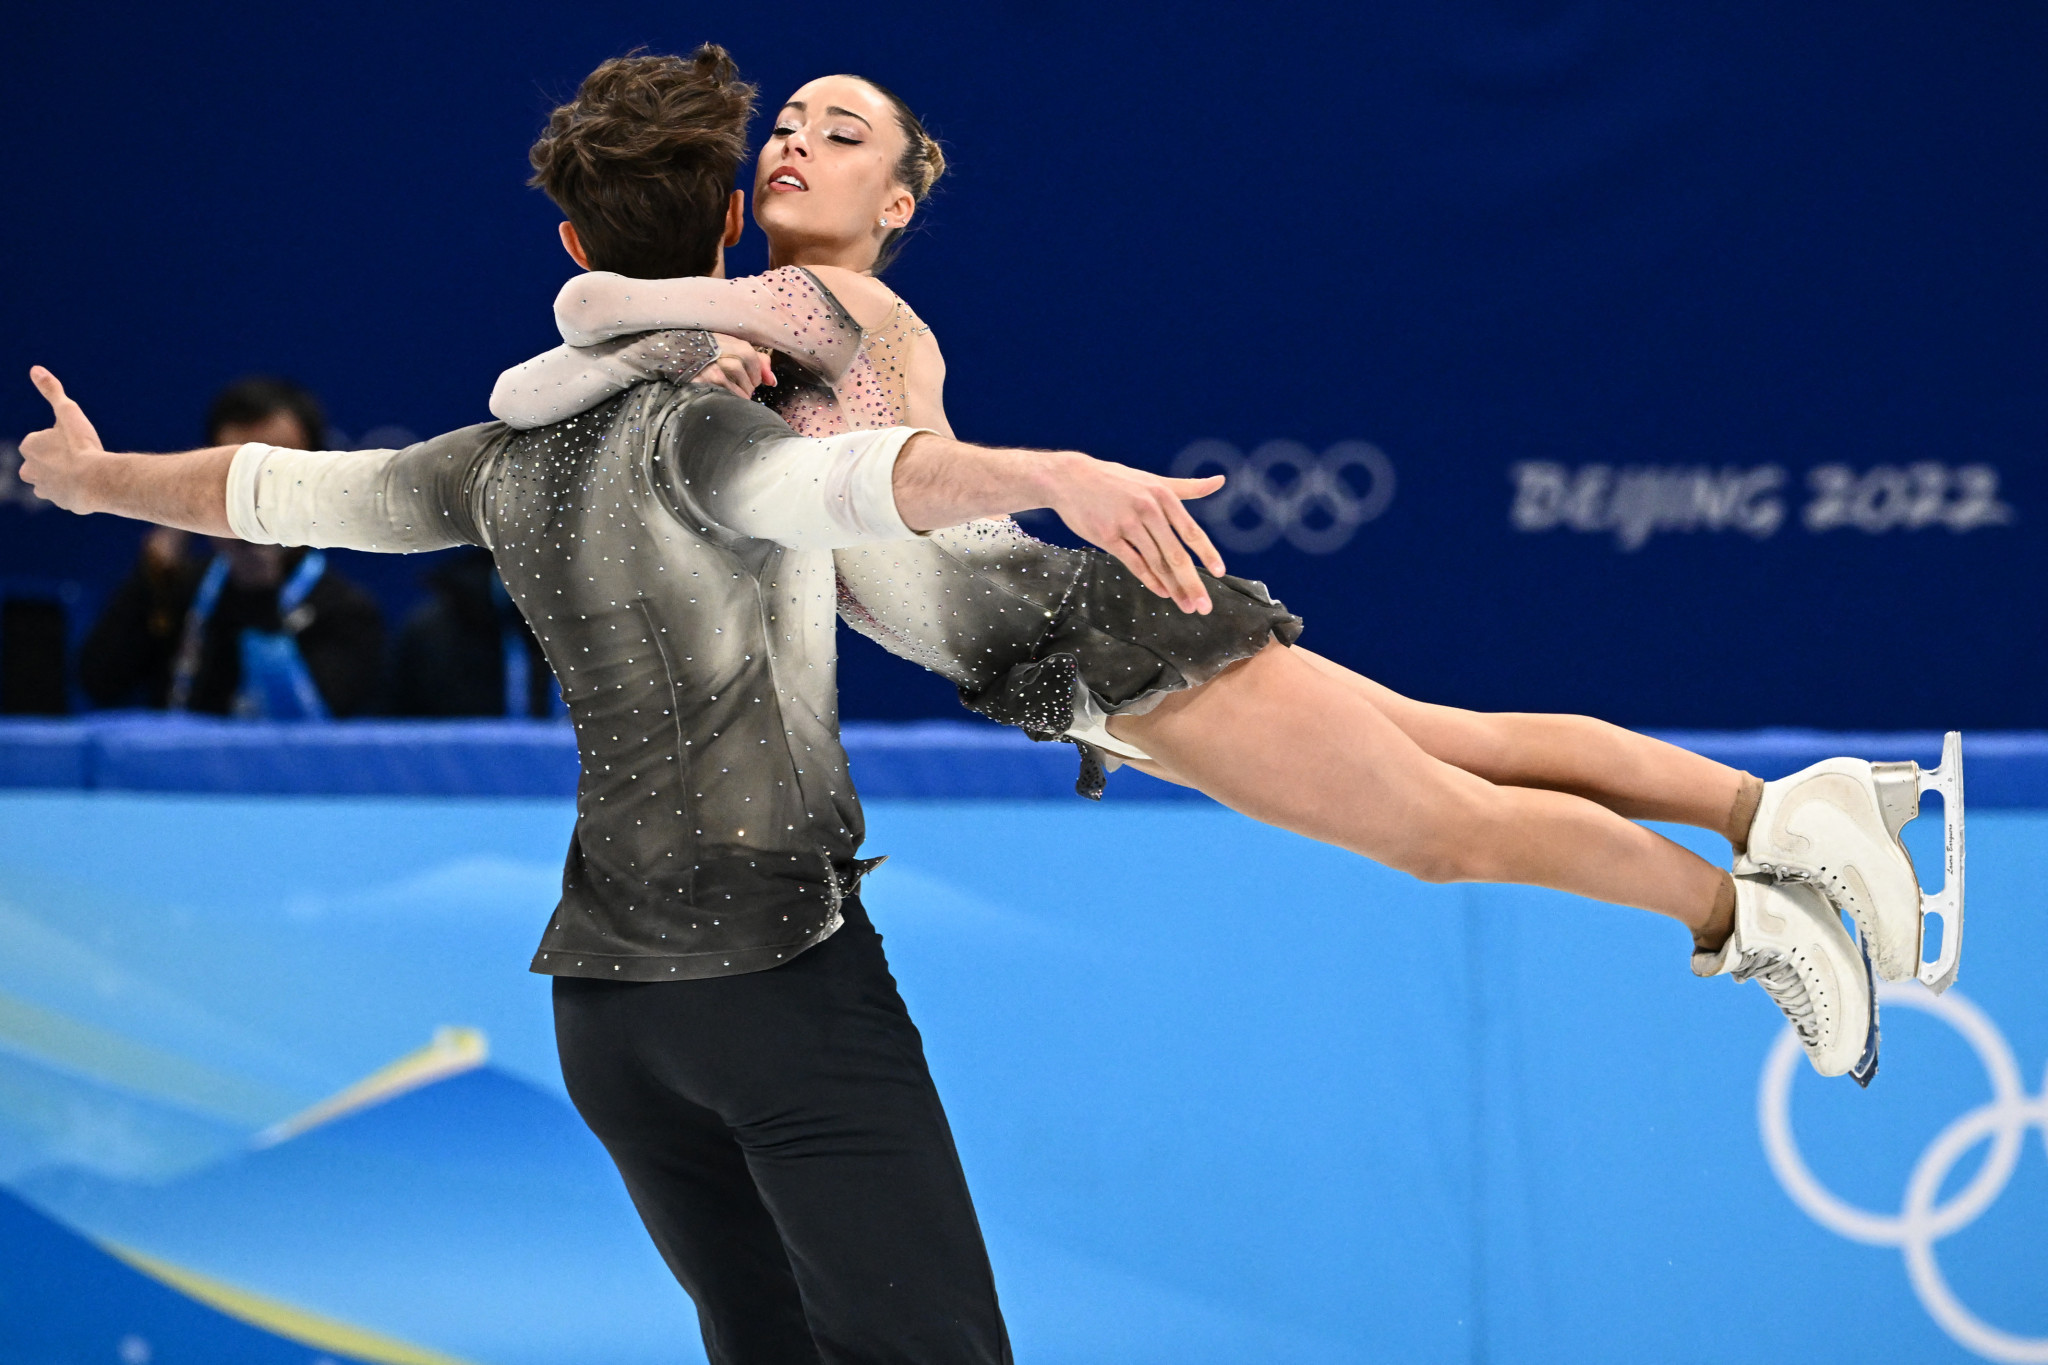 Laura Barquero competed alongside Marco Zandron in the pairs figure skating competition at Beijing 2022 ©Getty Images